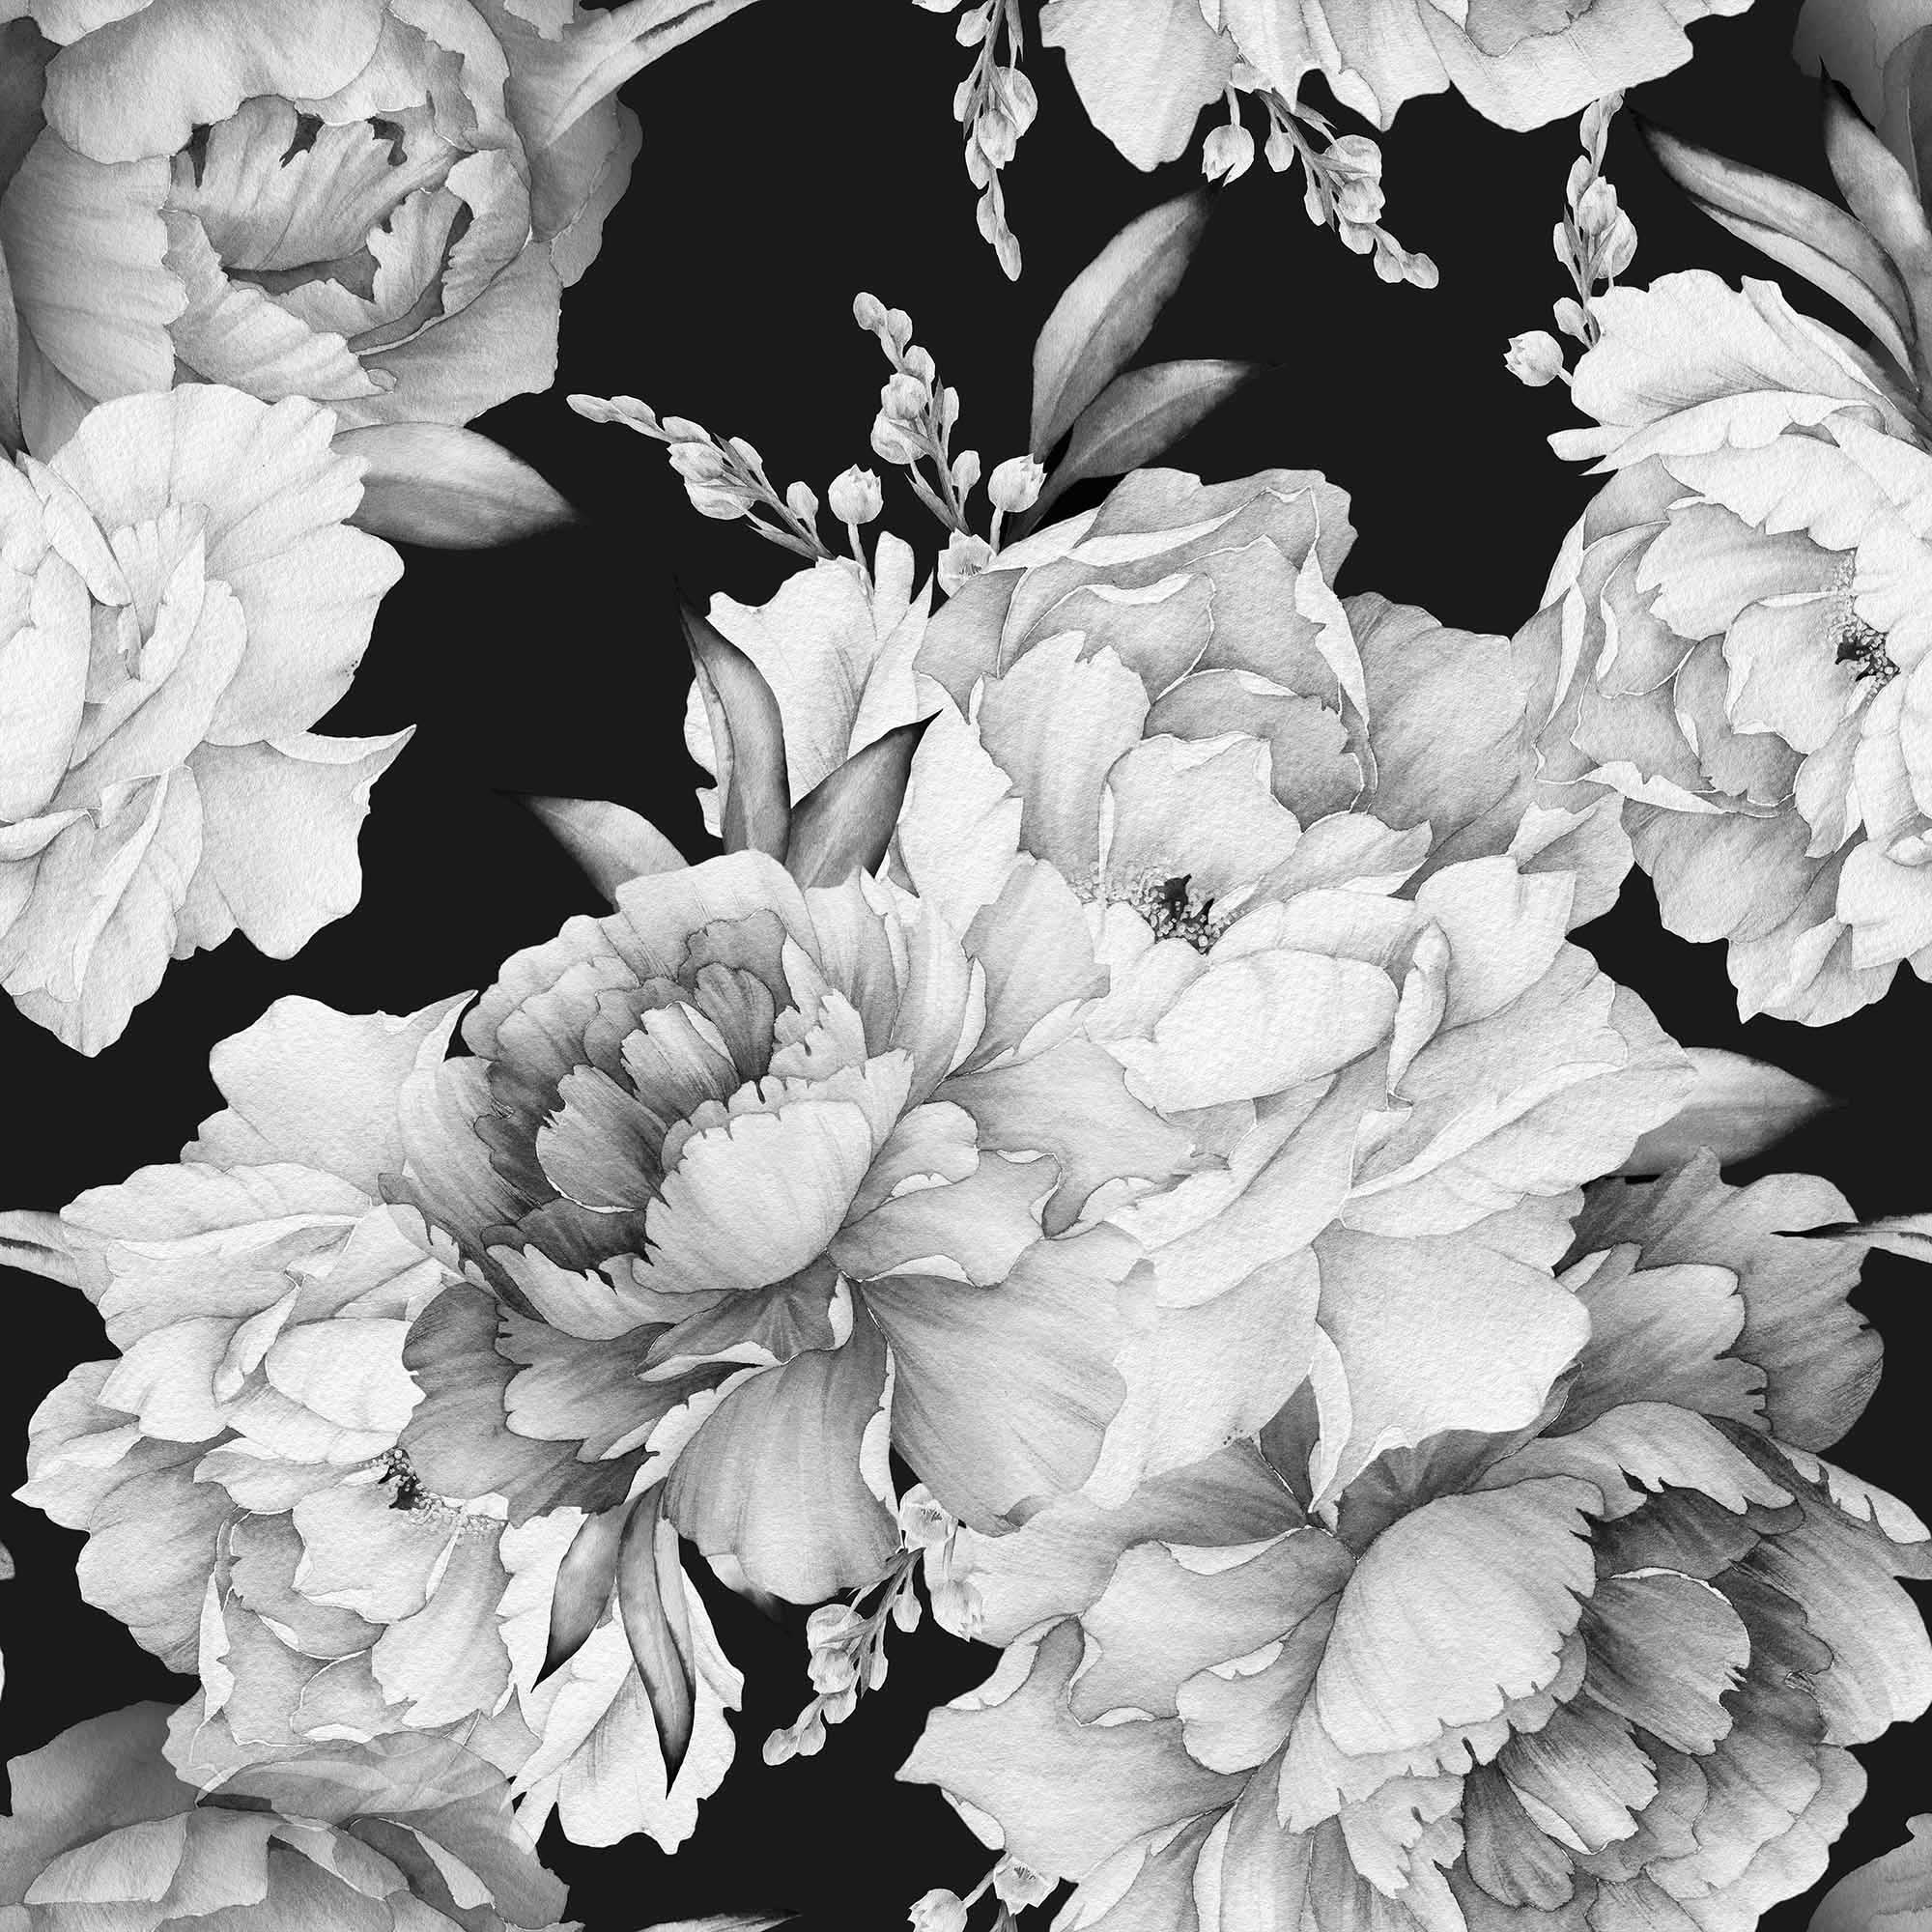 Wallpaper Mural Watercolor Peonies in Black and White Black Background   Muralunique